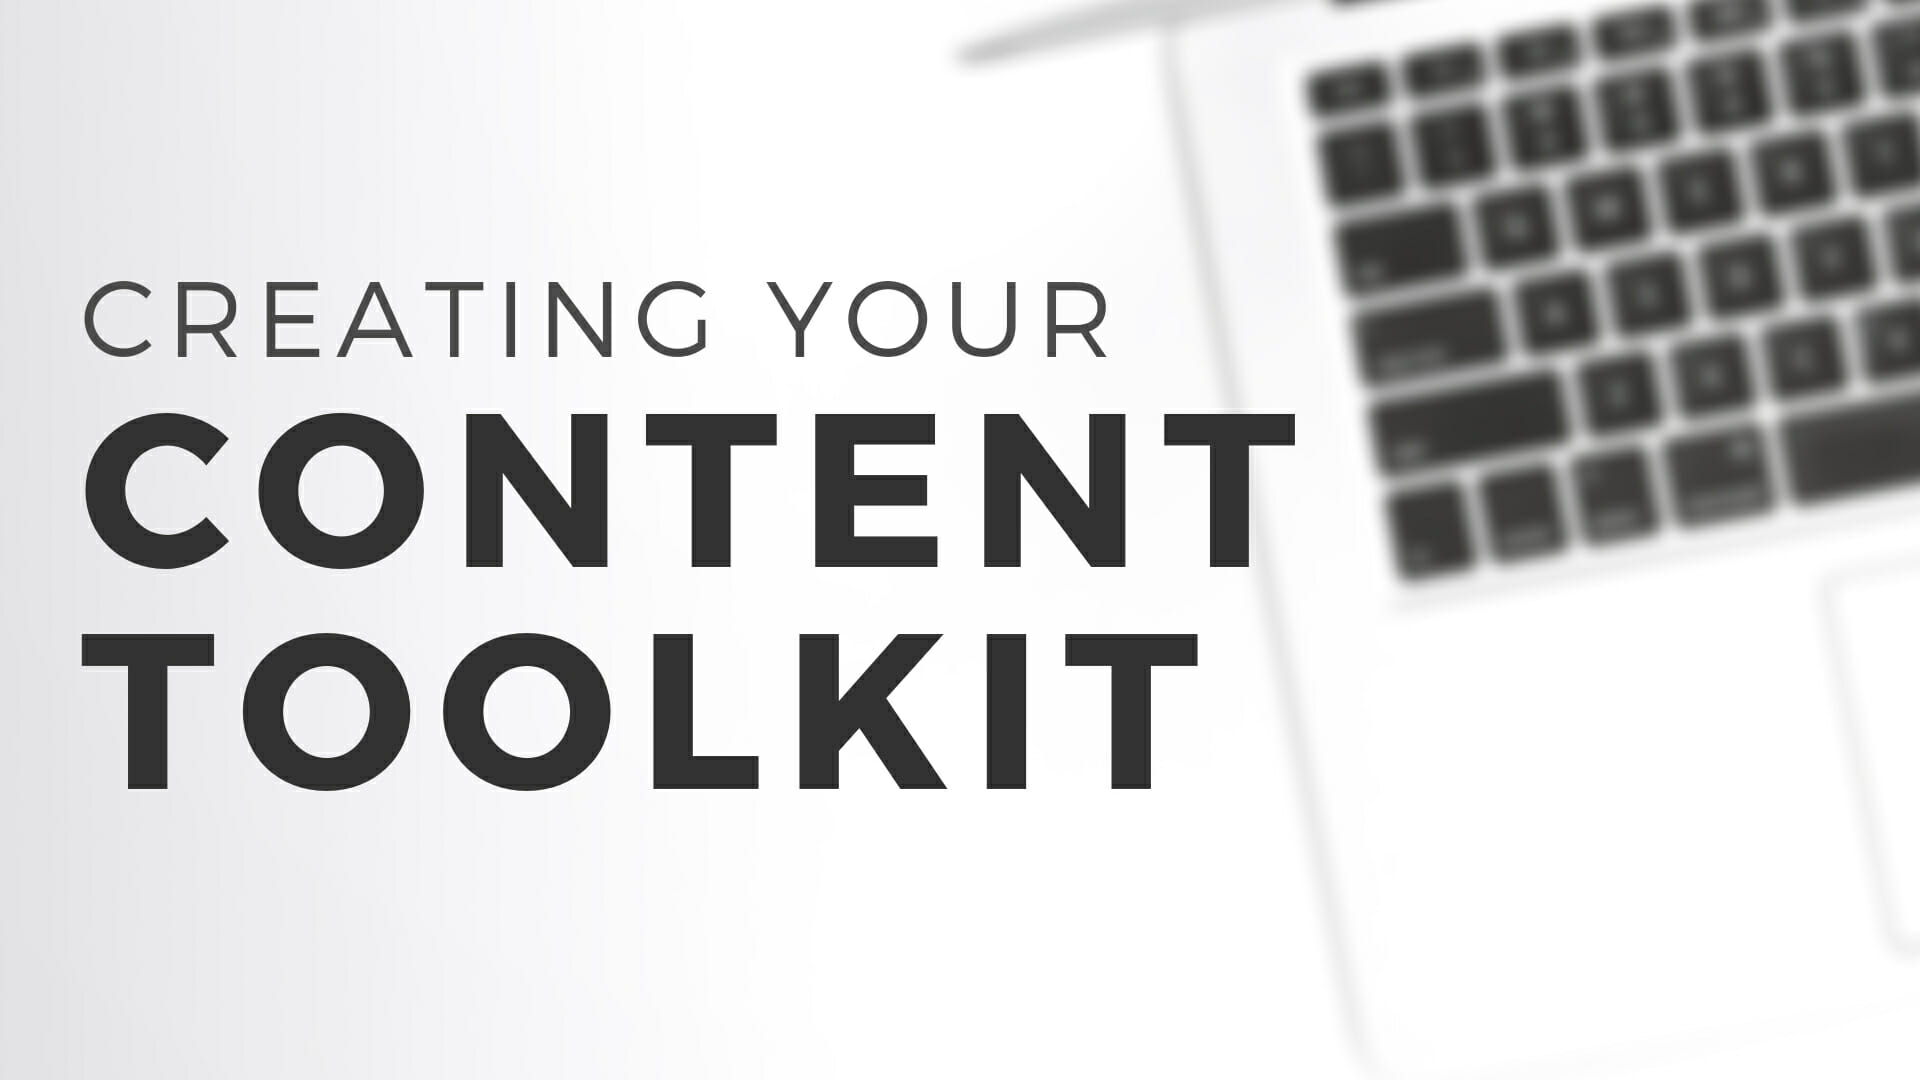 Creating Your Content Toolkit